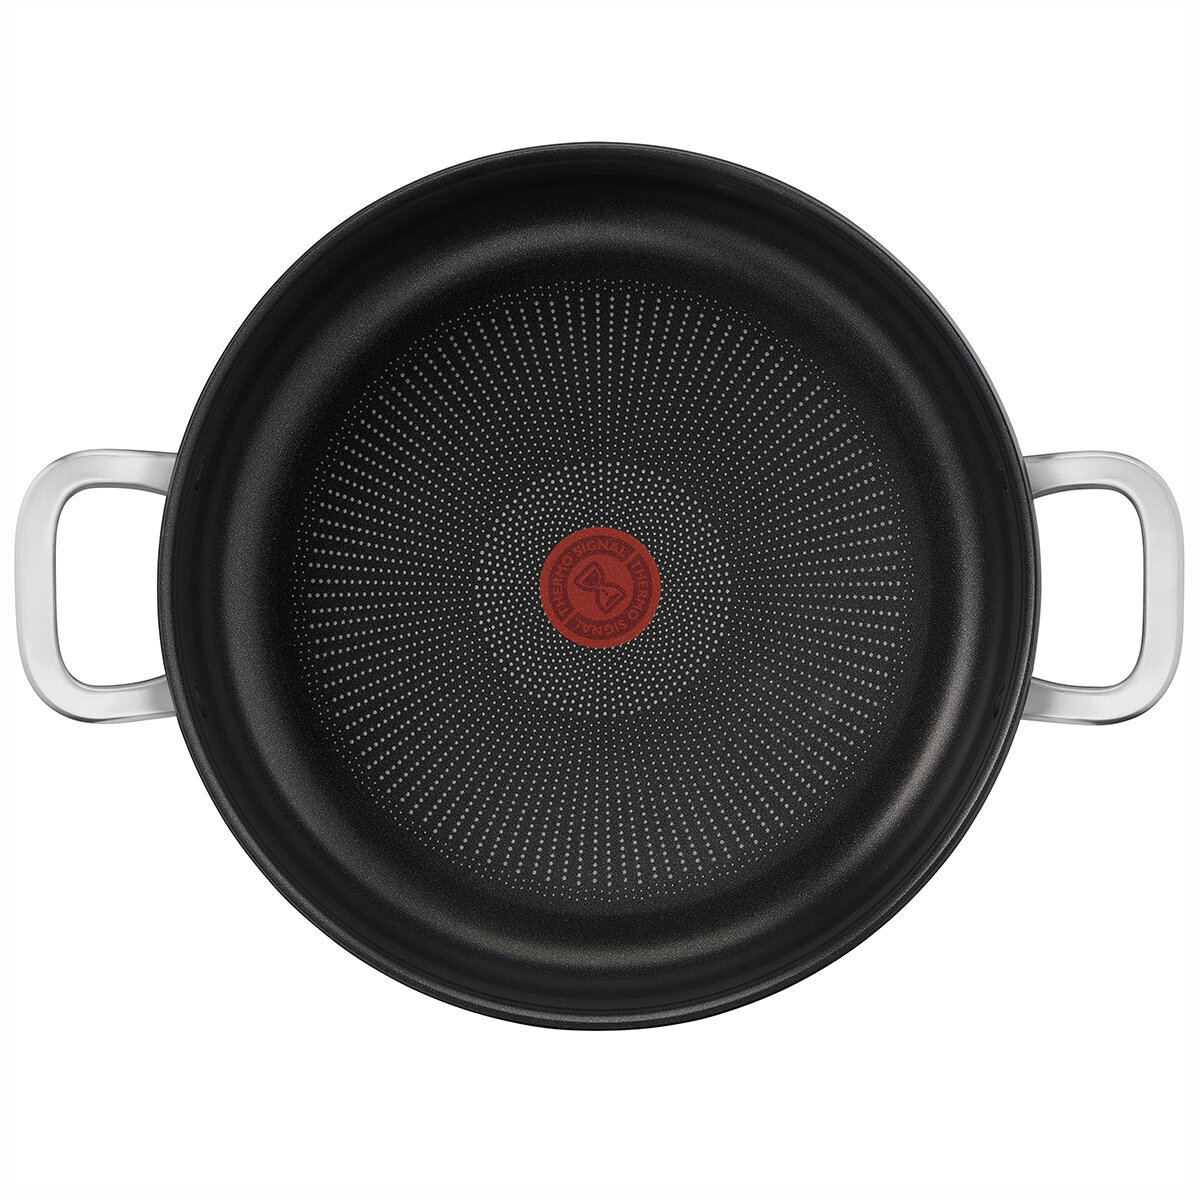 Tefal Premium Specialty 32 cm Hard Anodised Induction Wok with Lid